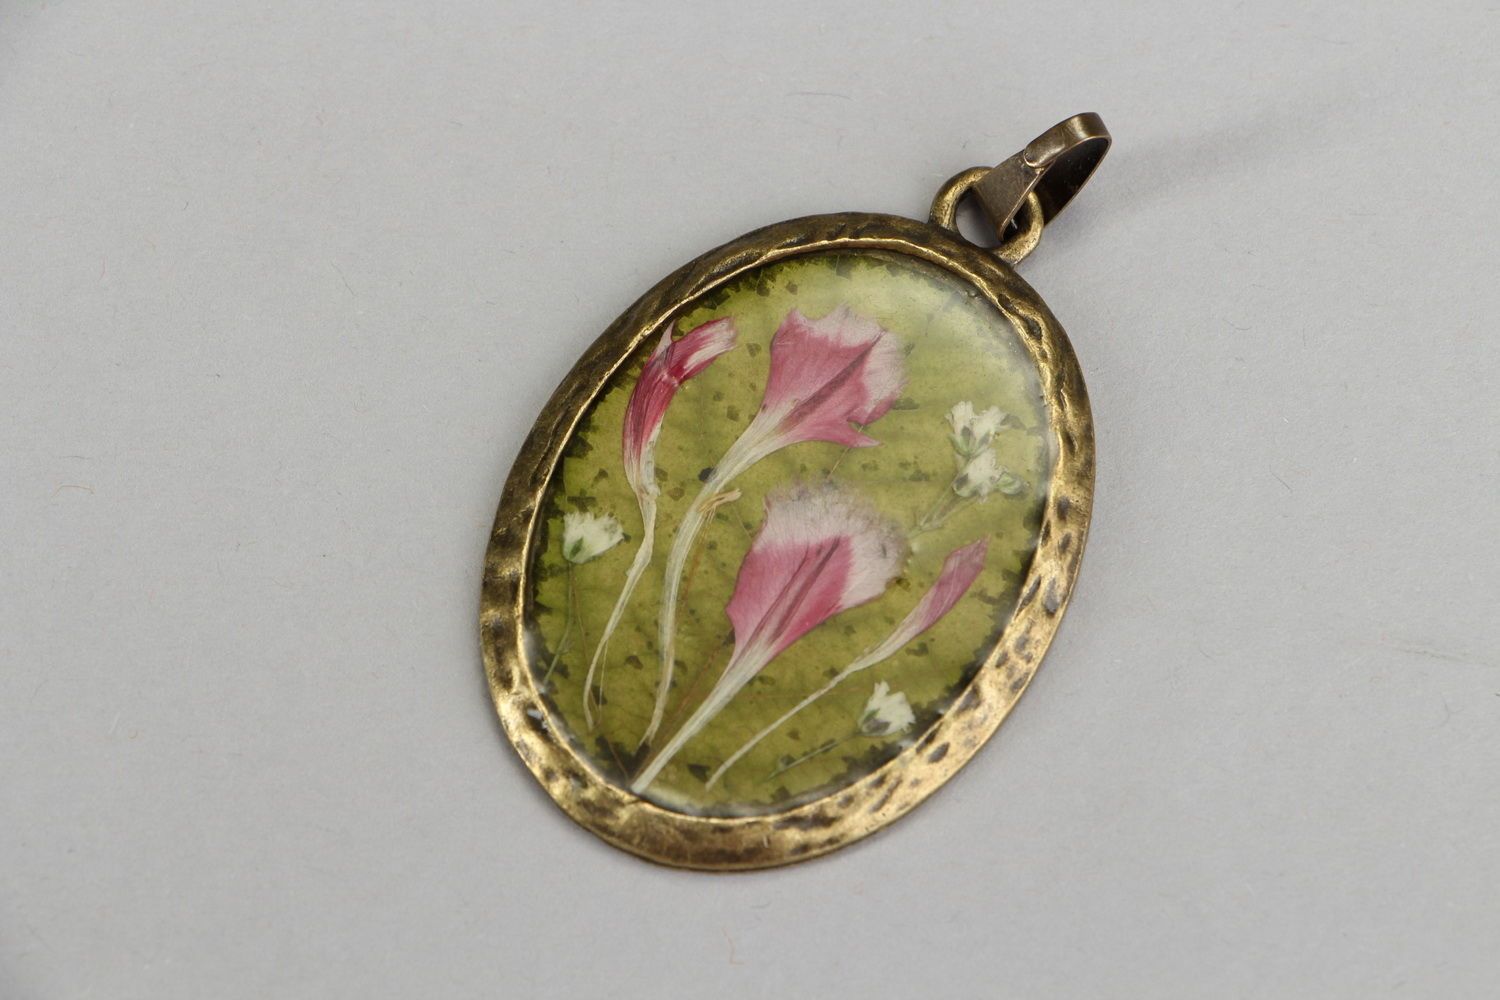 Pendant made of bronze with real flowers photo 1